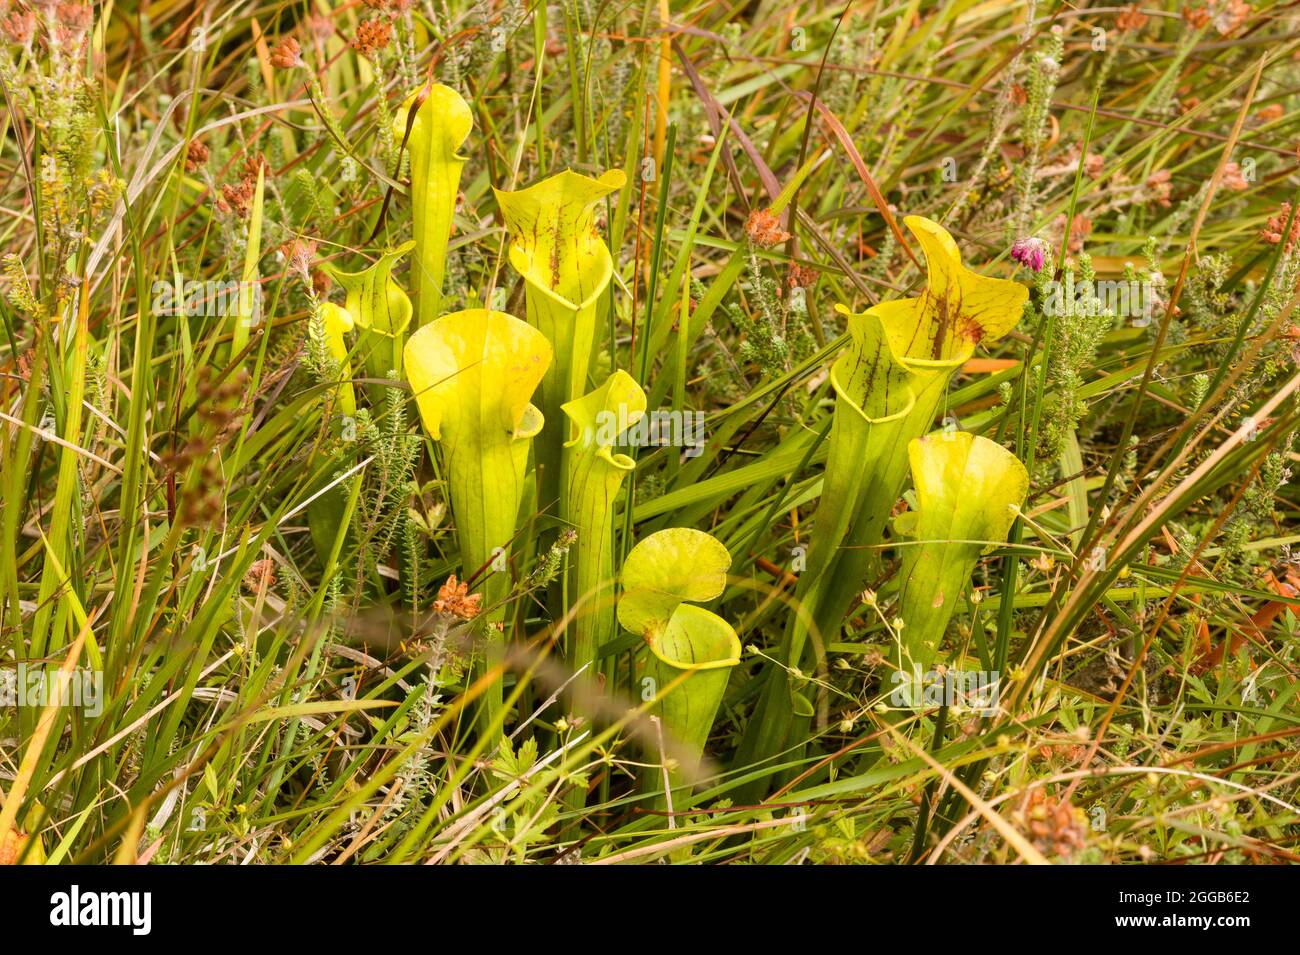 Carnivorous pitcher plants, non-native plants introduced into a bog area of Chobham Common, Surrey, England, UK Stock Photo